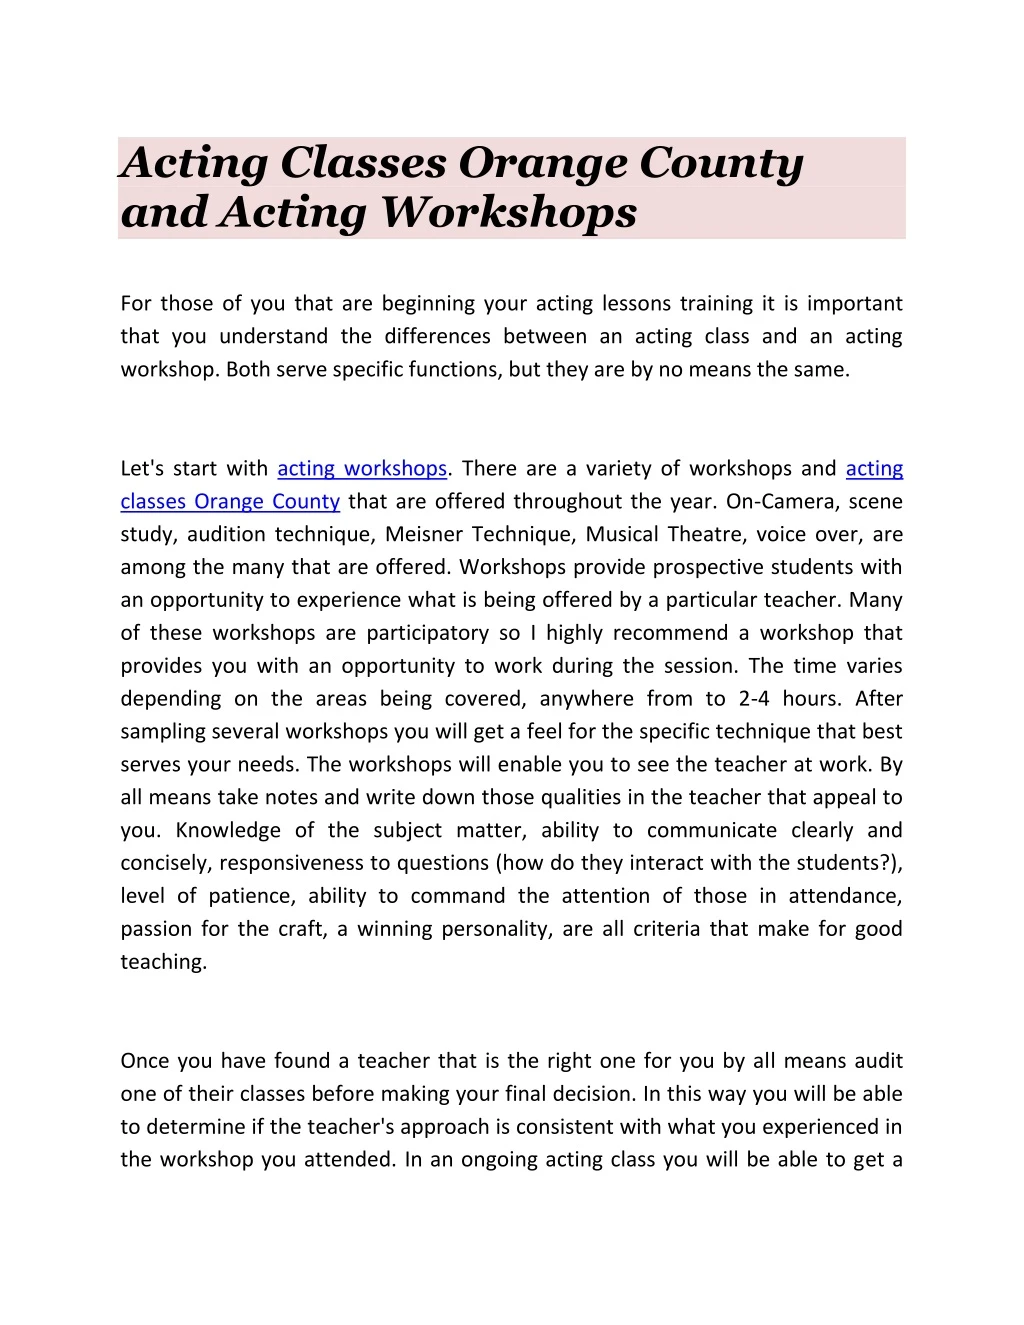 acting classes orange county and acting workshops